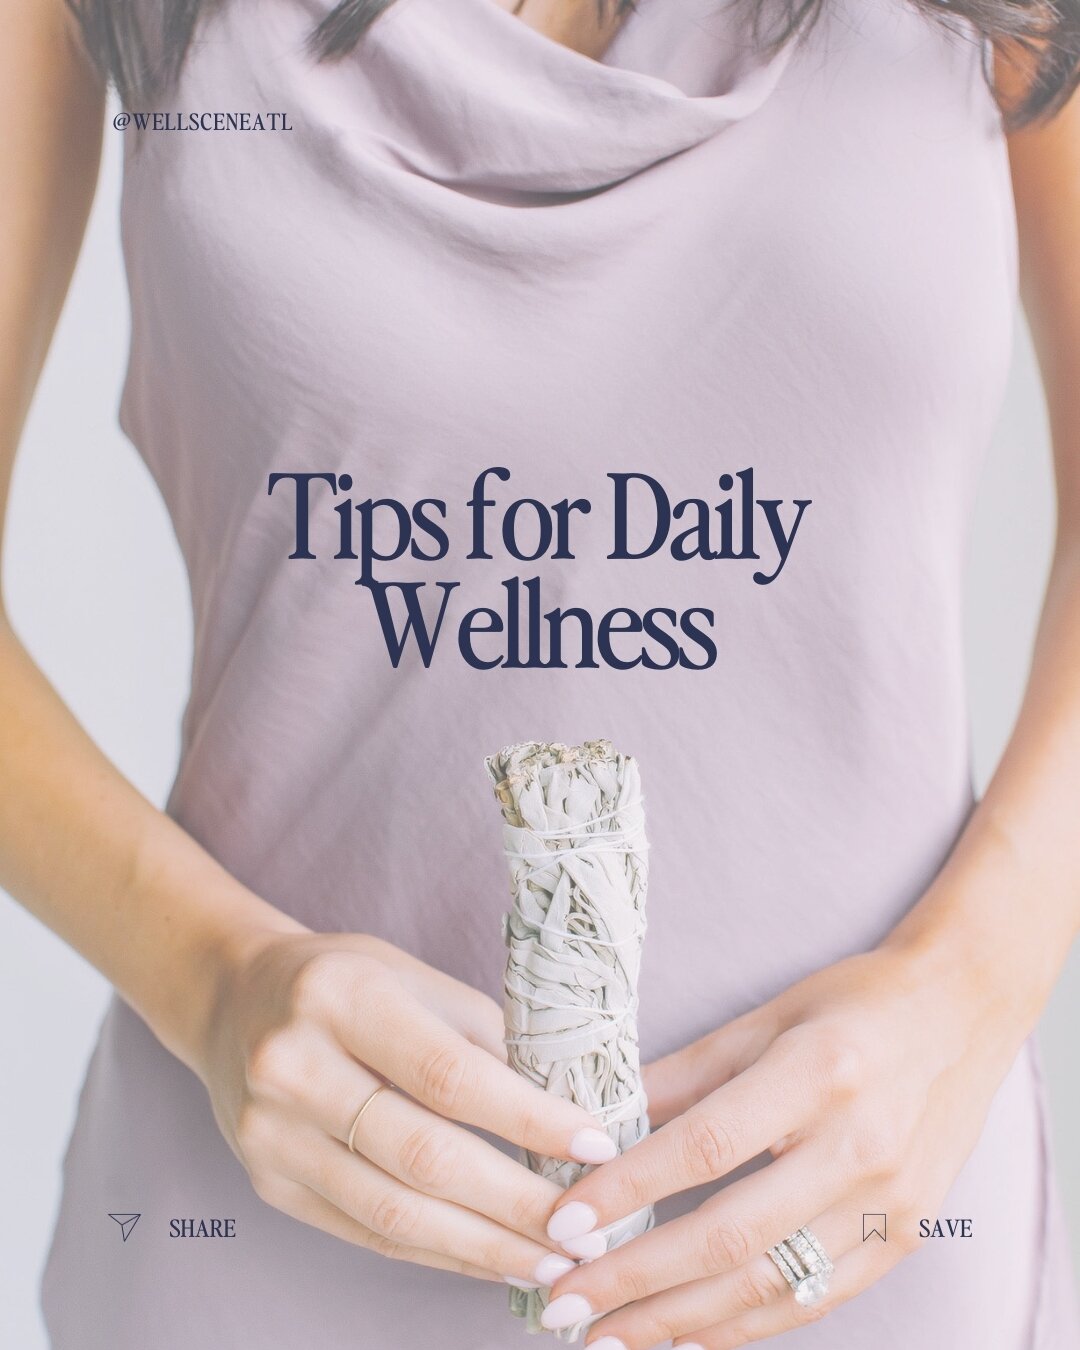 If they aren't already, add these tips into your routine for simple daily wellness✨⁣.
.
.
#healthiswealth #wellness #wellnessjourney #wellnesswarrior #wellnesslifestyle #wellnesscoaching #wellnesstips